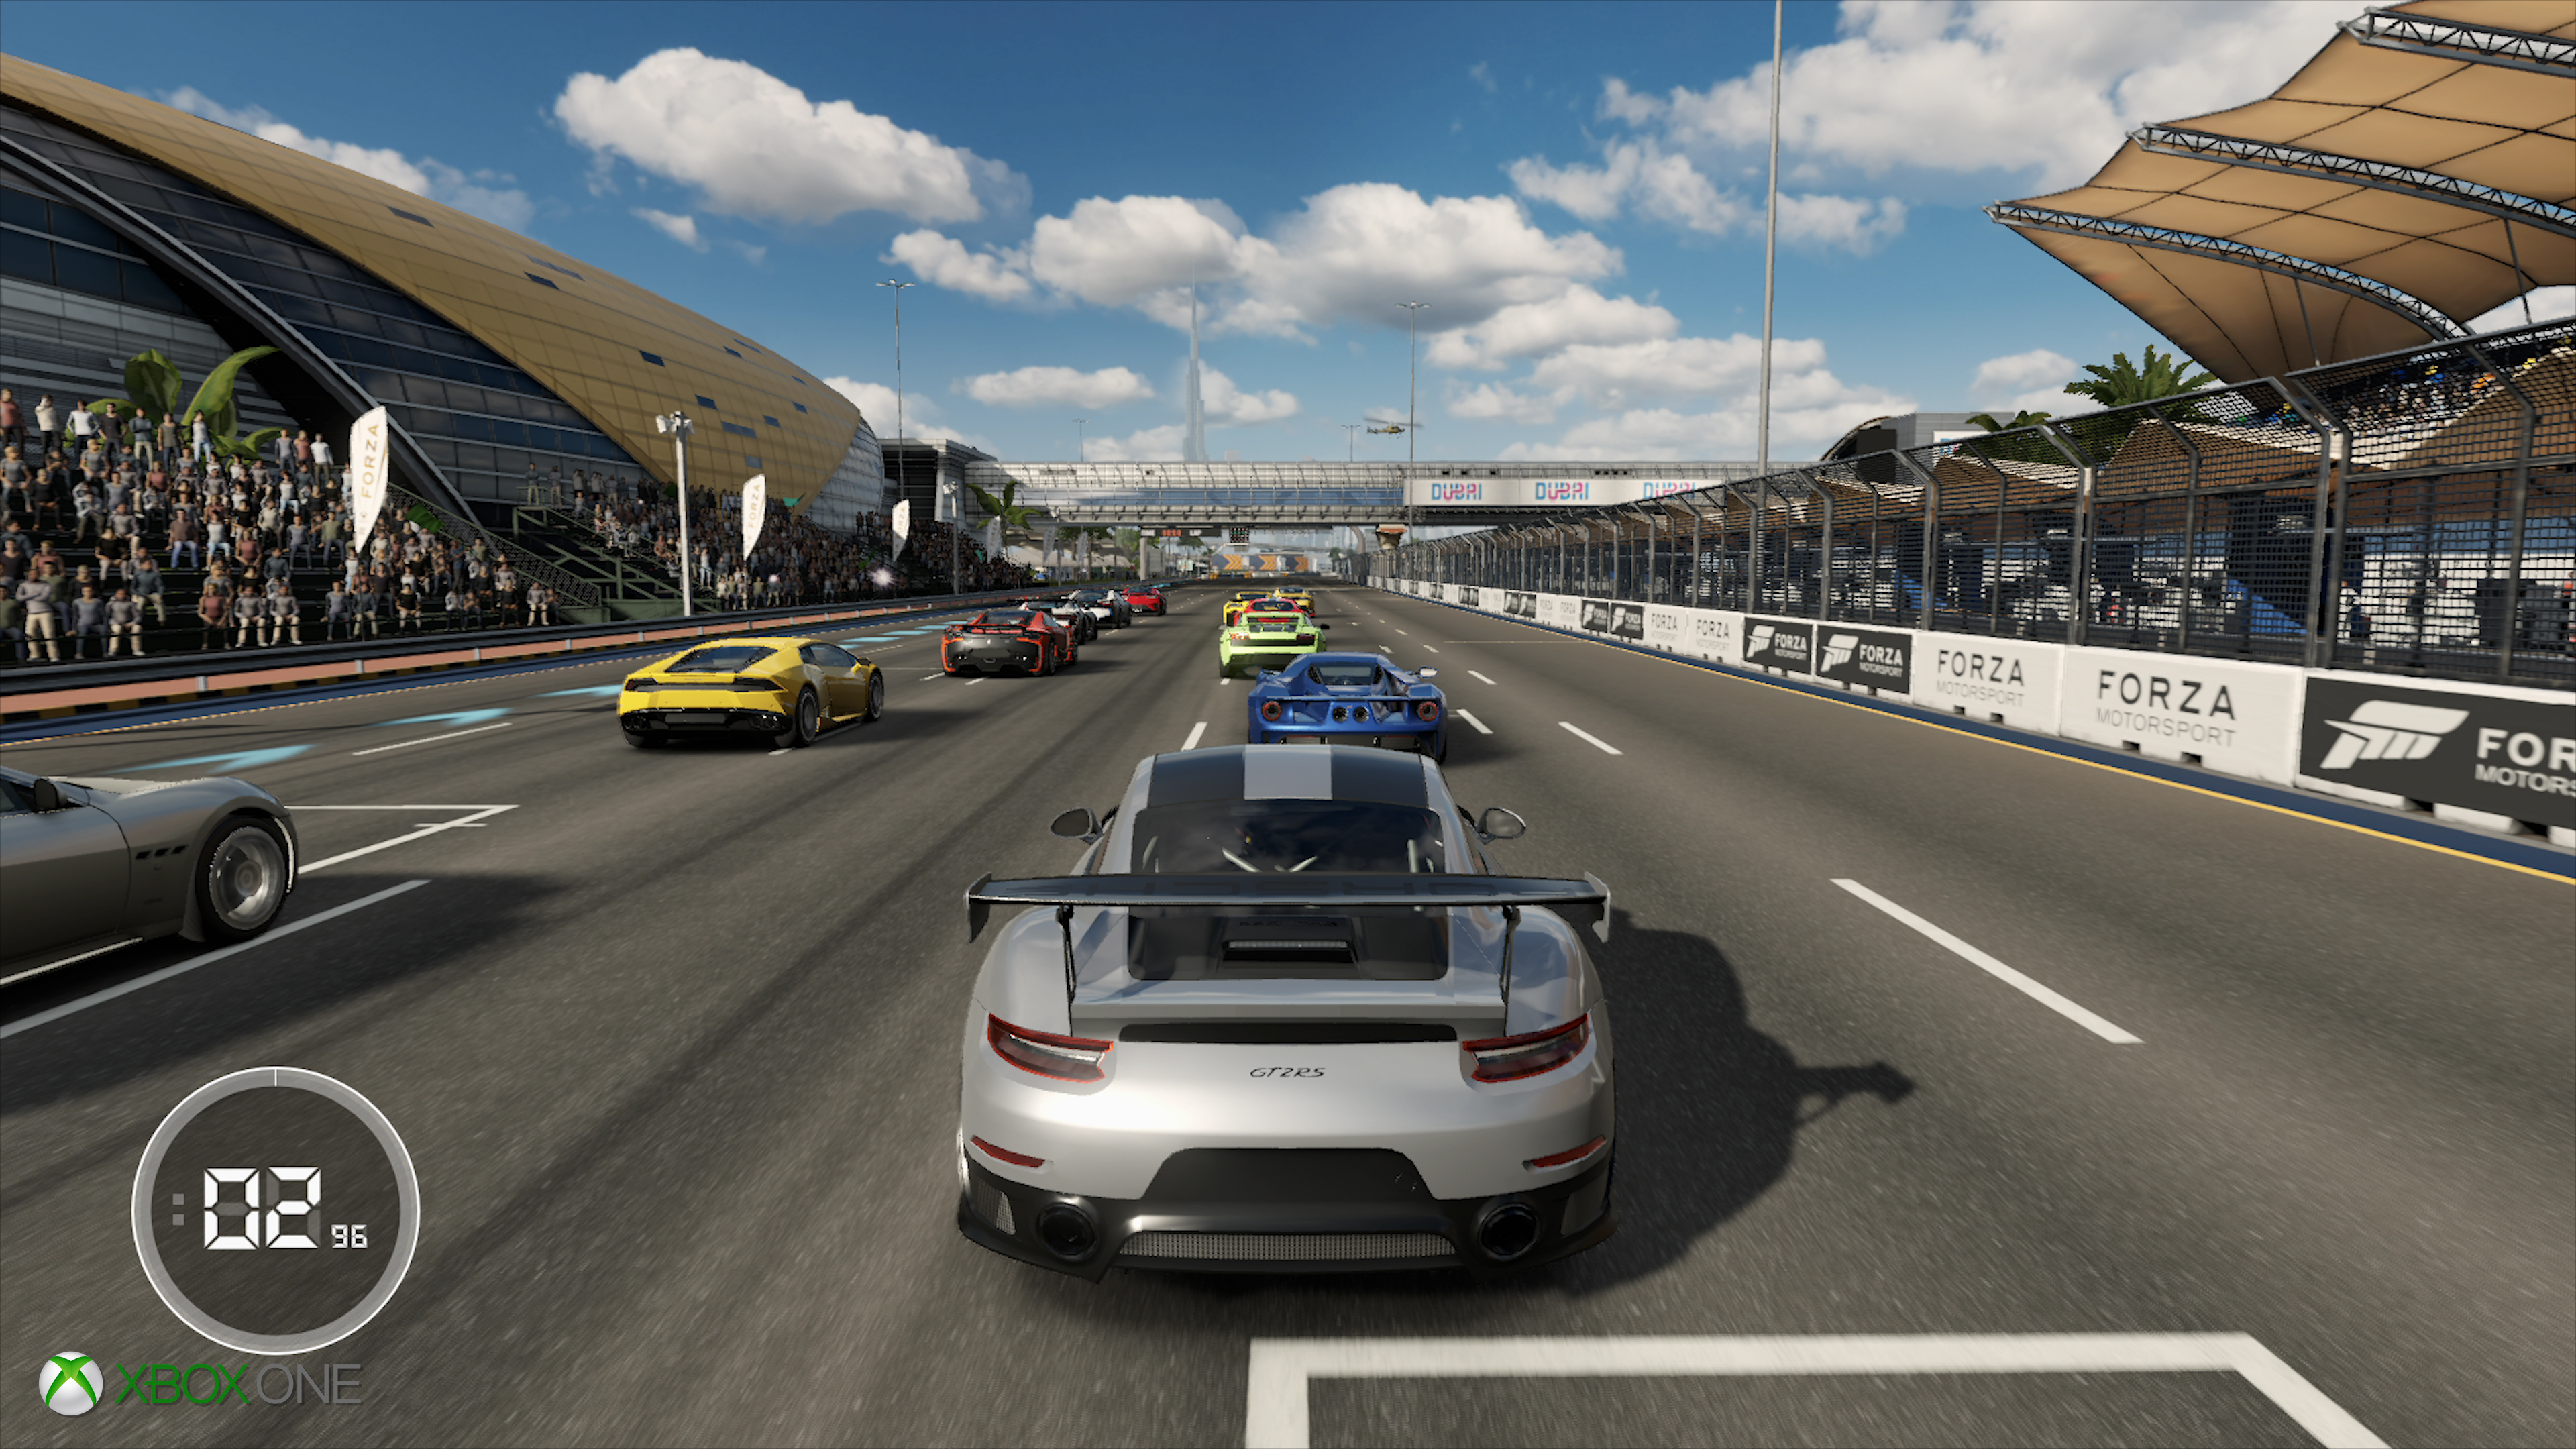  Forza Motorsport 7 (Xbox One) : Video Games